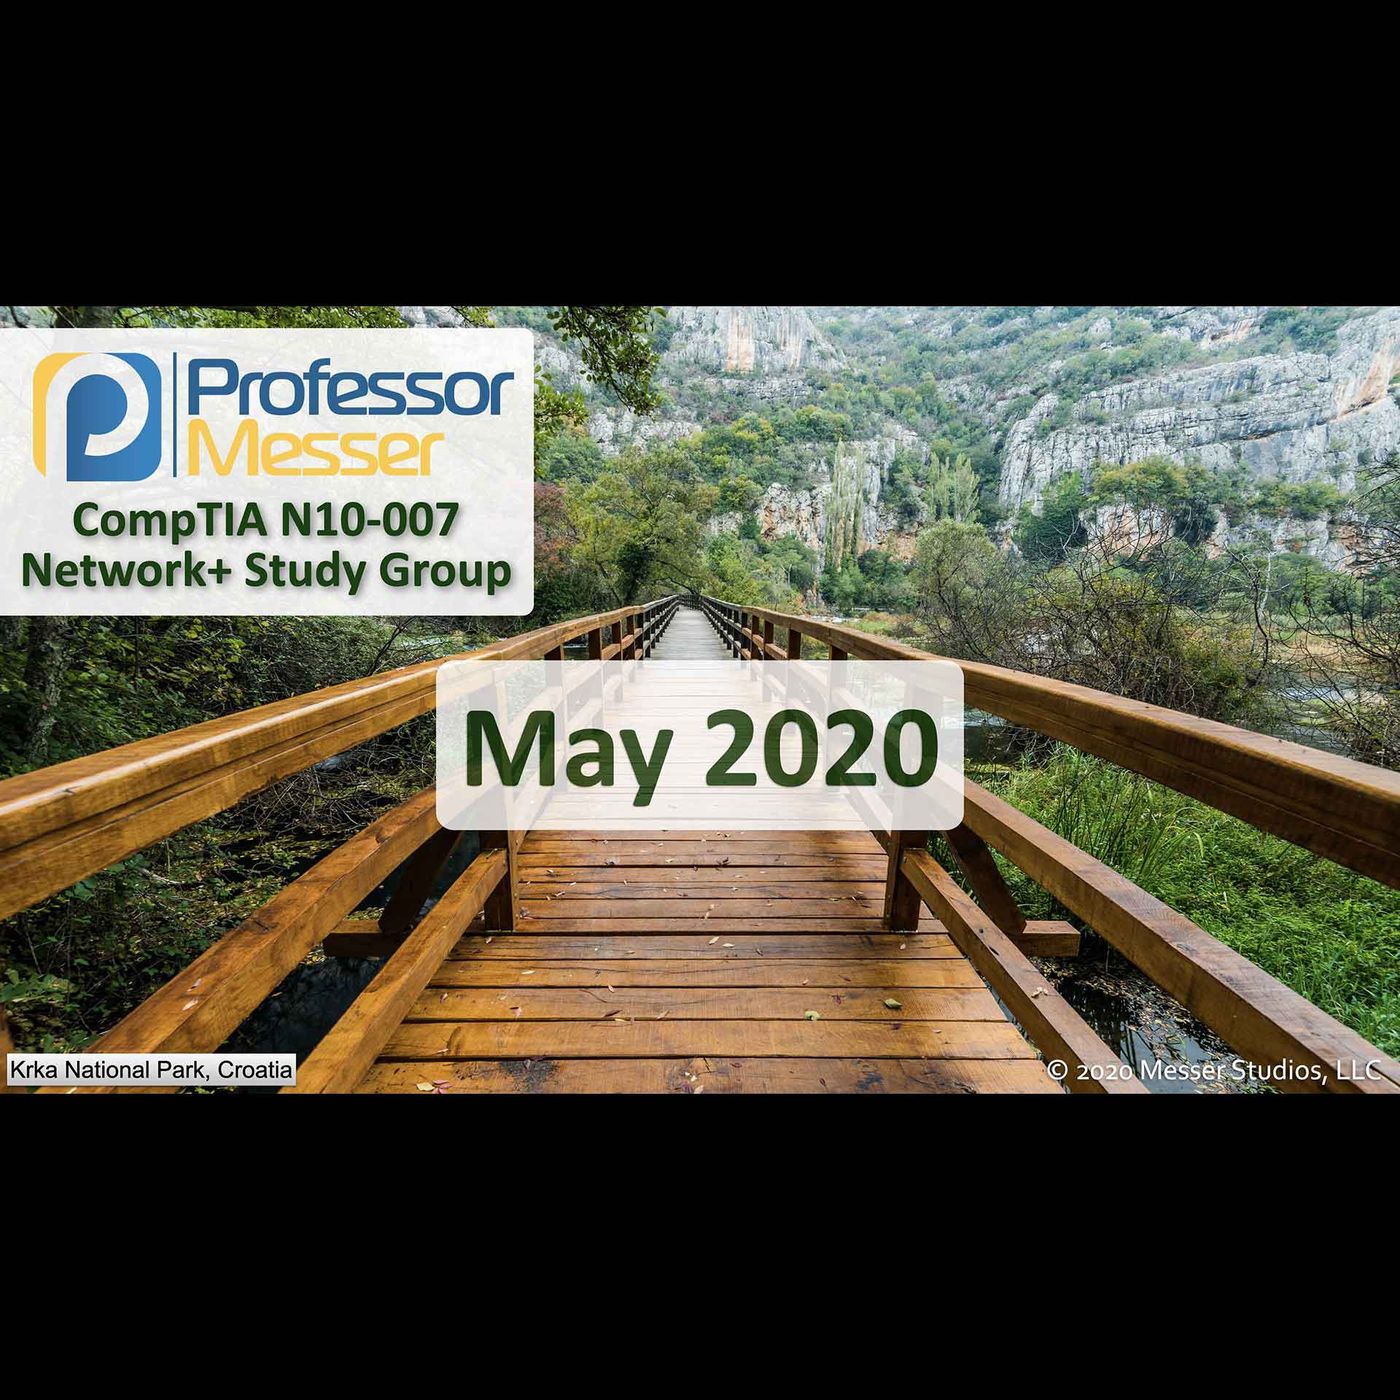 Professor Messer's Network+ Study Group - May 2020